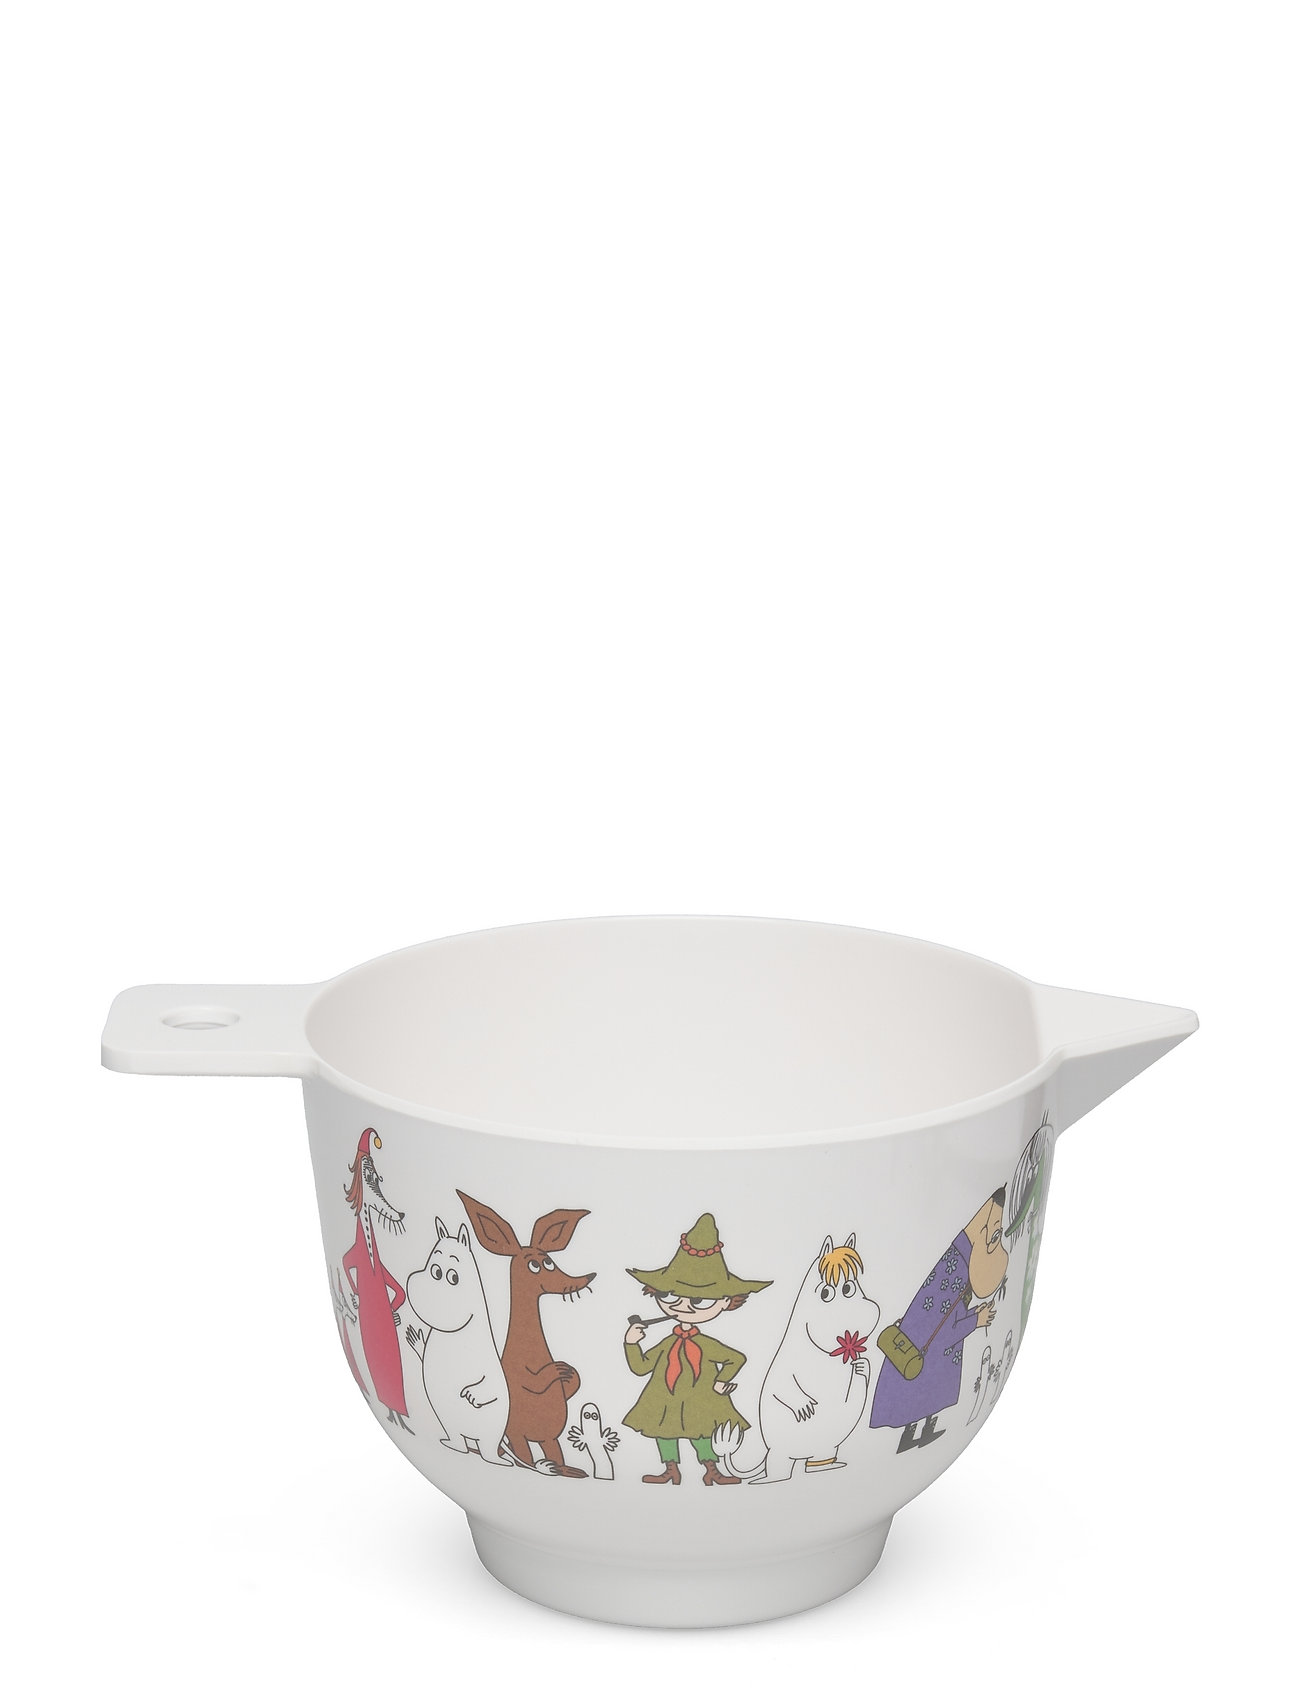 Moomin Melamine Bowl M Home Meal Time Baking & Cooking Mixing Bowls Green Martinex